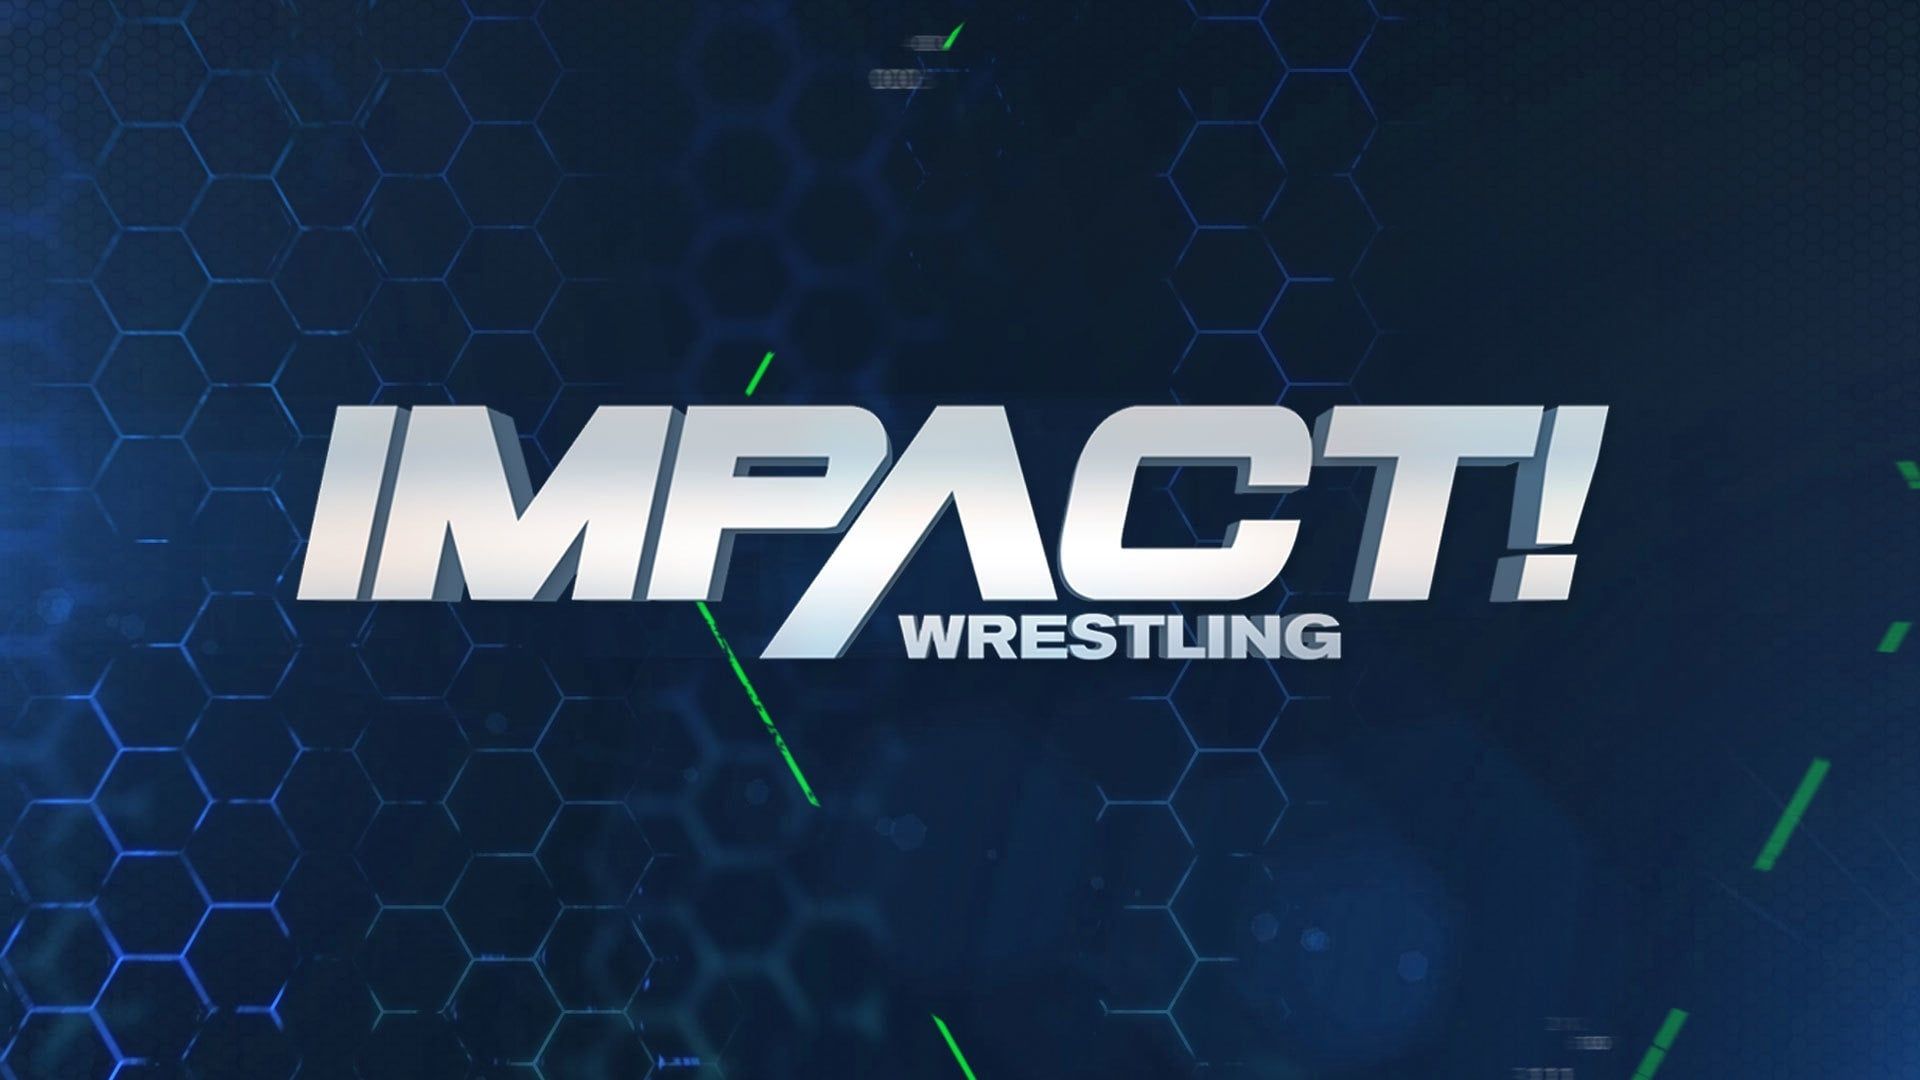 Season 17, Episode 52 The Road to Impact! Wrestling Bound for Glory 2020 Continues...